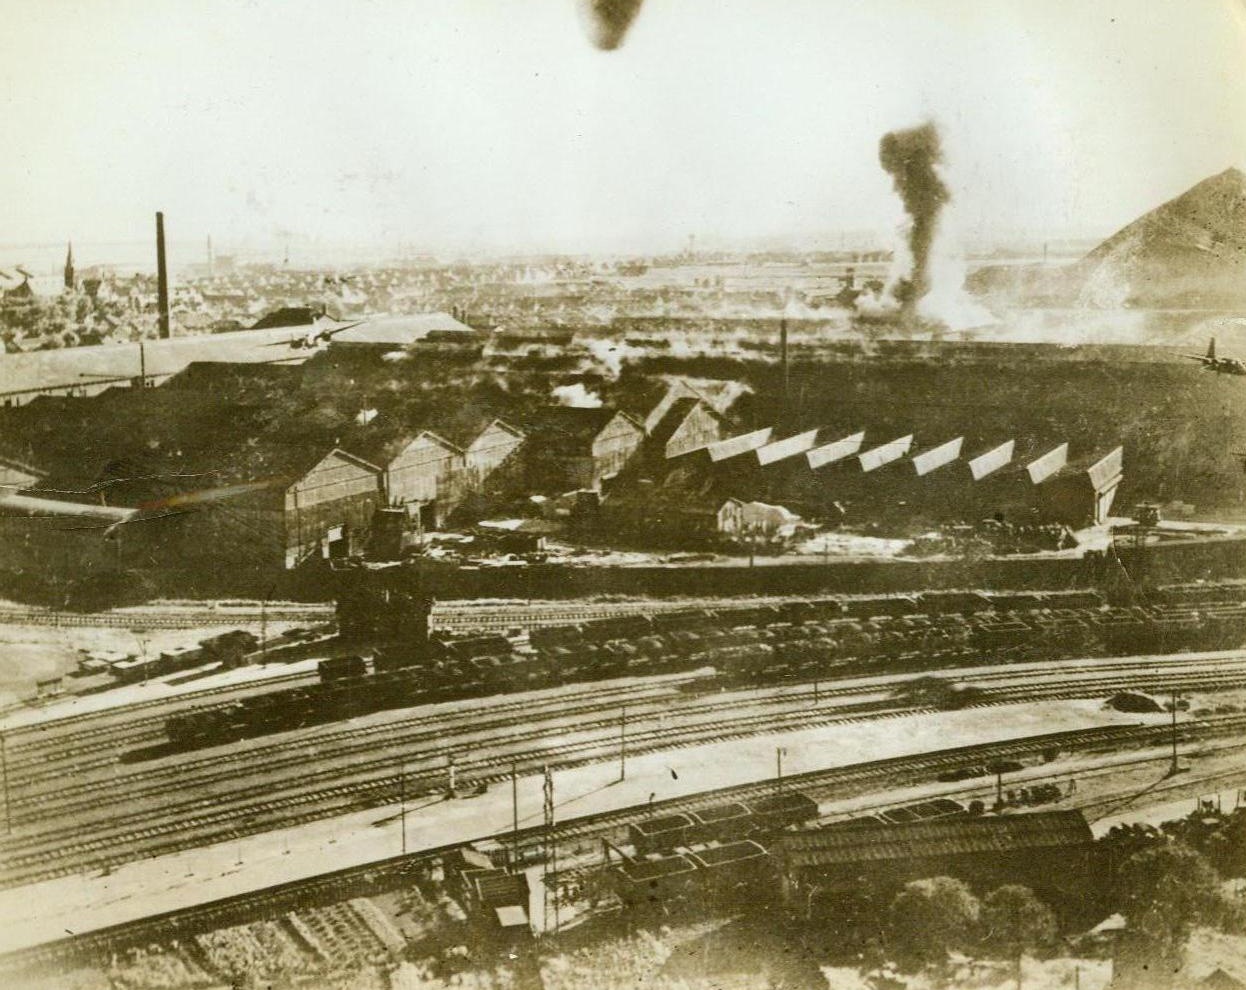 Boston Bombers In Action, 8/29/1943. Denain, France - With a smoke plume rising behind them as a bomb finds its mark, two Boston Bombers (to left and right of photo) of the RAF Fighter Command fly low over their objective, the important steel and armament works of the Societe Francaise De Construction Mecaniques and of the S.A. Des Hautes Forneaux Forges Et Acieres. The plants, which lie close together about five miles southwest of Valenciennes, were attacked from levels ranging from 50 to 1500 feet on August 16th. Although the industrial targets suffered heavy damage, destruction to residential property in the neighborhood was very light. Credit: ACME;